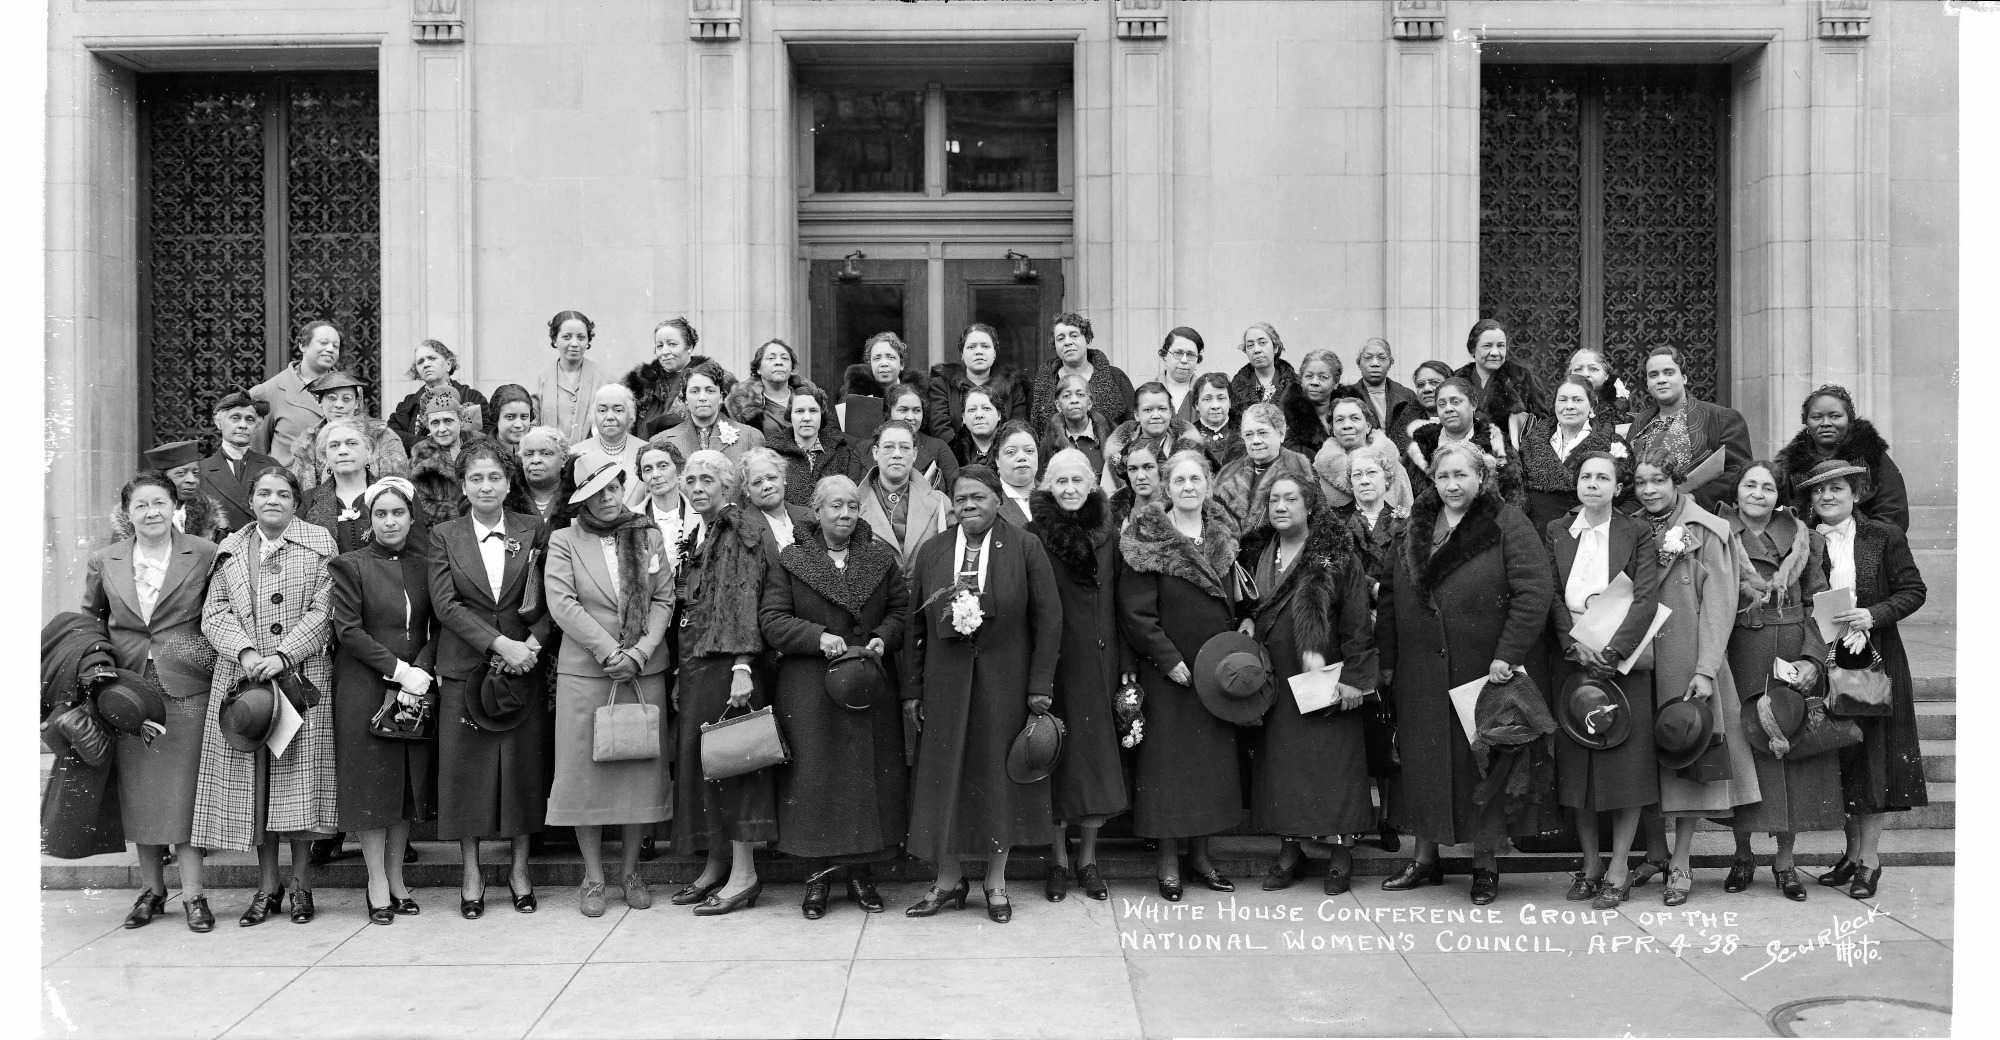 Photograph of White House Conference on Governmental Cooperation in the Approach to the Problems of Negro Women and Children